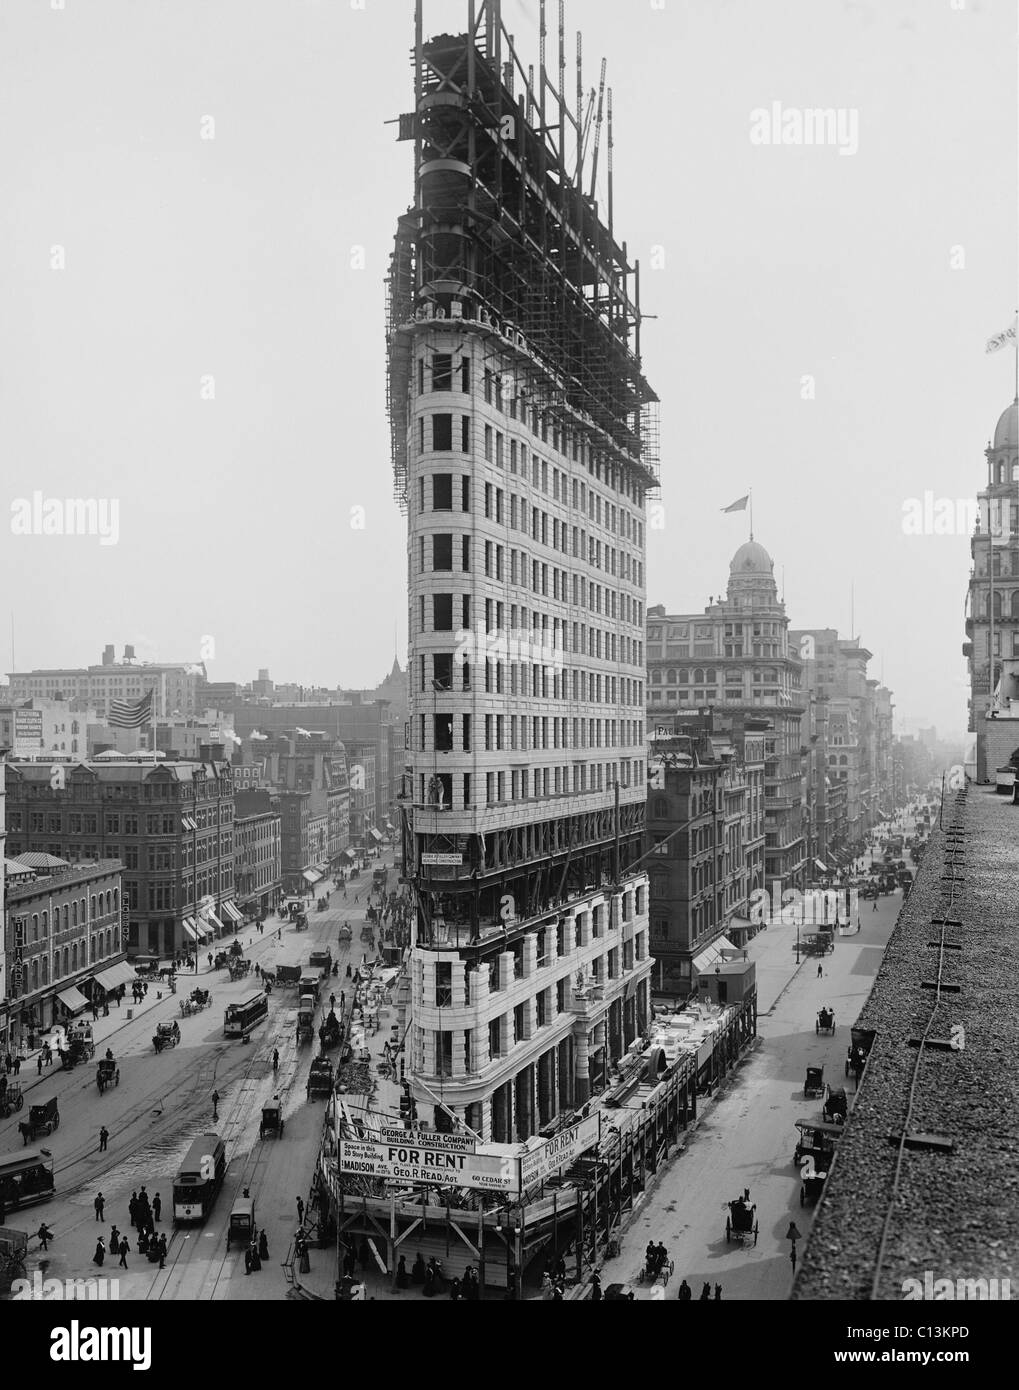 Flatiron Building during construction in 1902. The steel frame construction, a rectangular grid of I-beams, ascends above the stone facing. Signs advertise space for rent in what was then called the 'Fuller Building.' Stock Photo